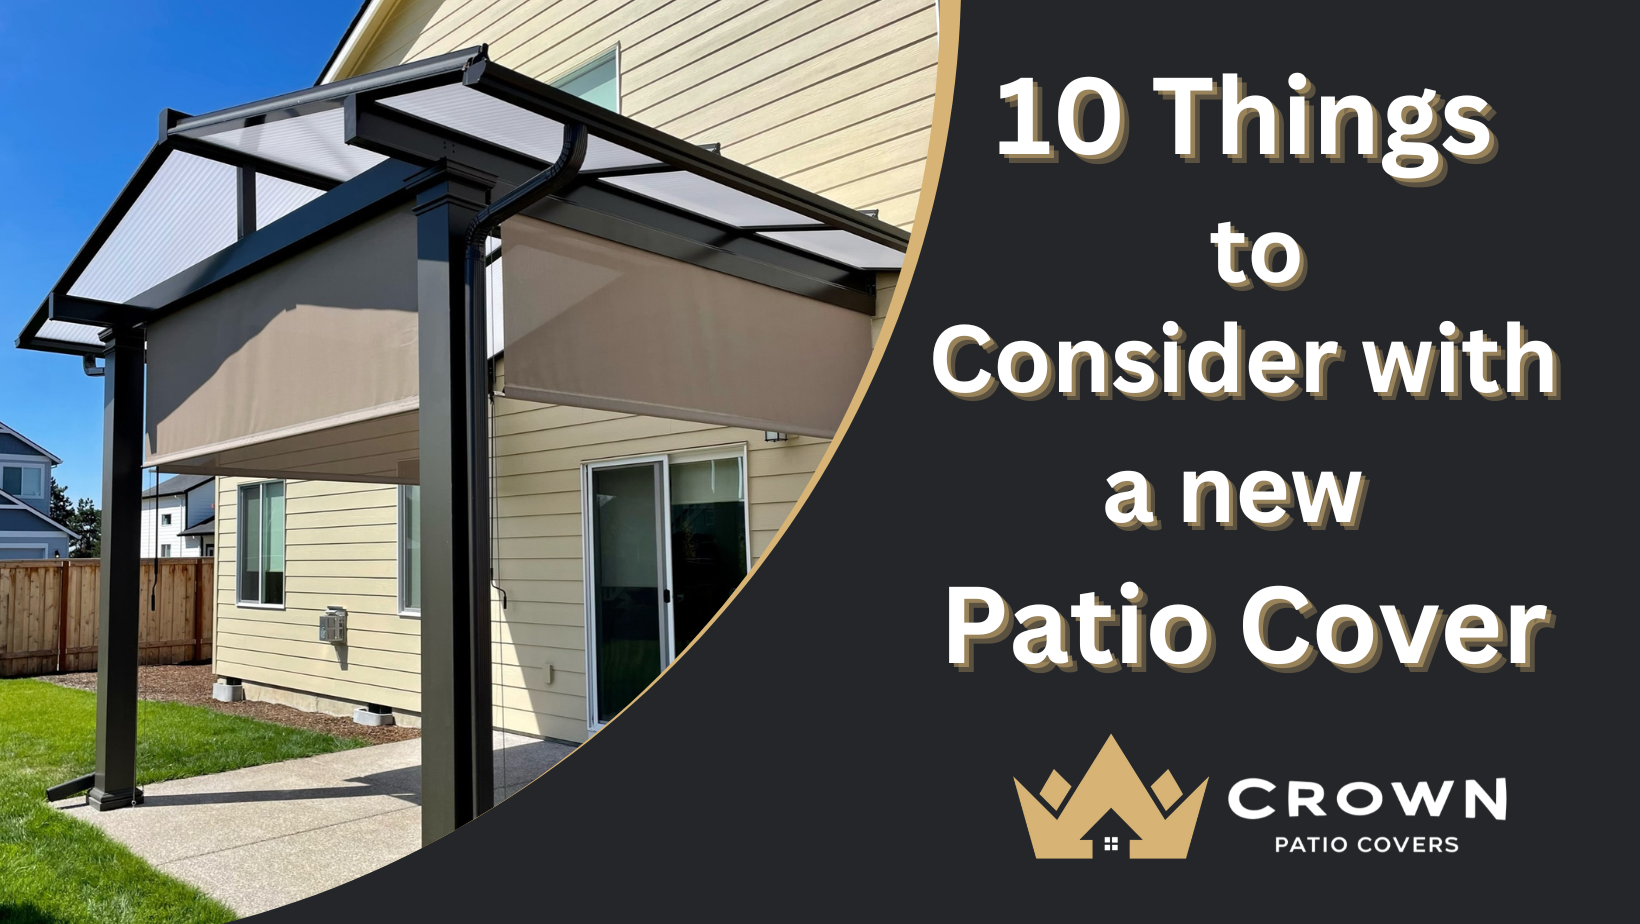 10 Things to consider when purchasing a new patio cover